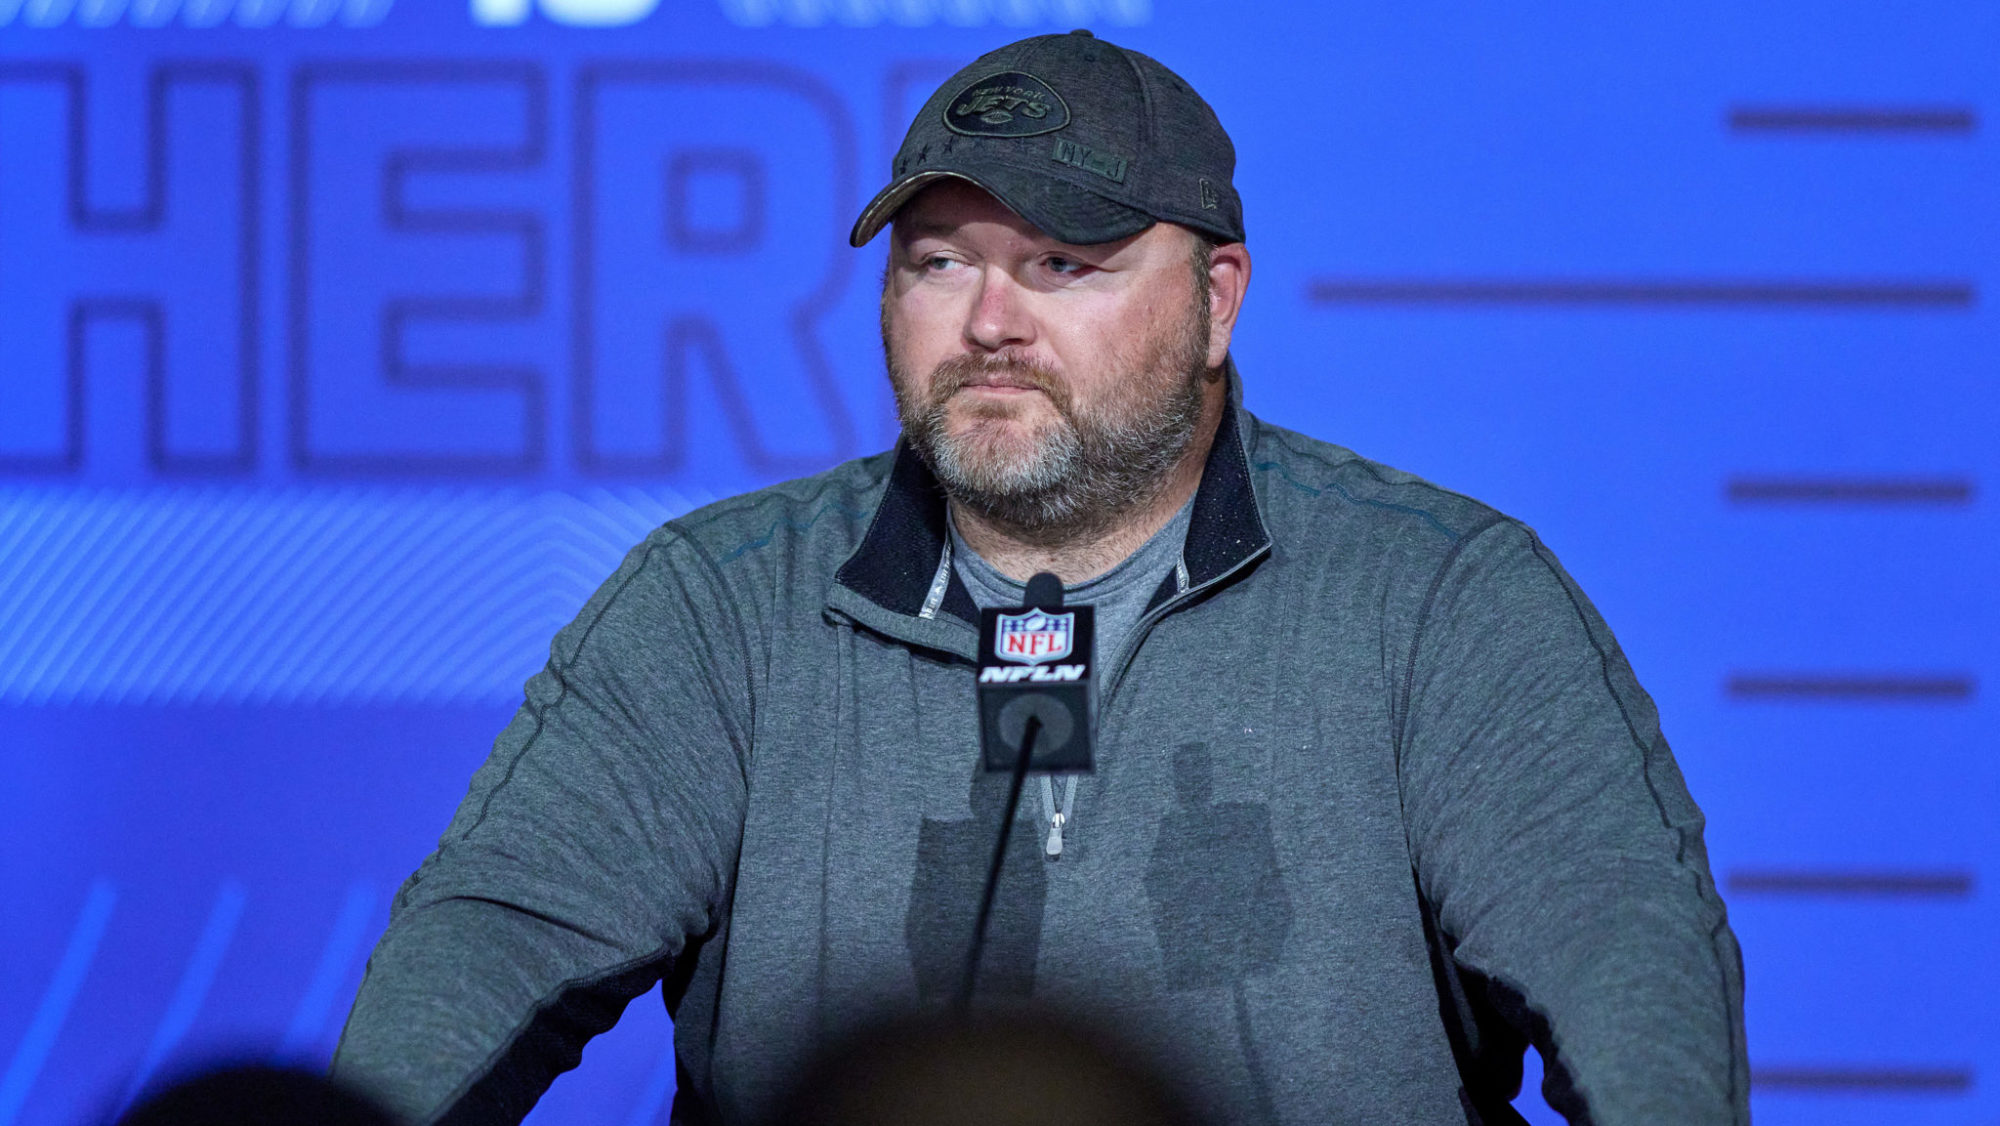 INDIANAPOLIS, IN - MARCH 02: New York Jets general manager Joe Douglas answers questions from the media during the NFL Scouting Combine on March 2, 2022, at the Indiana Convention Center in Indianapolis, IN.